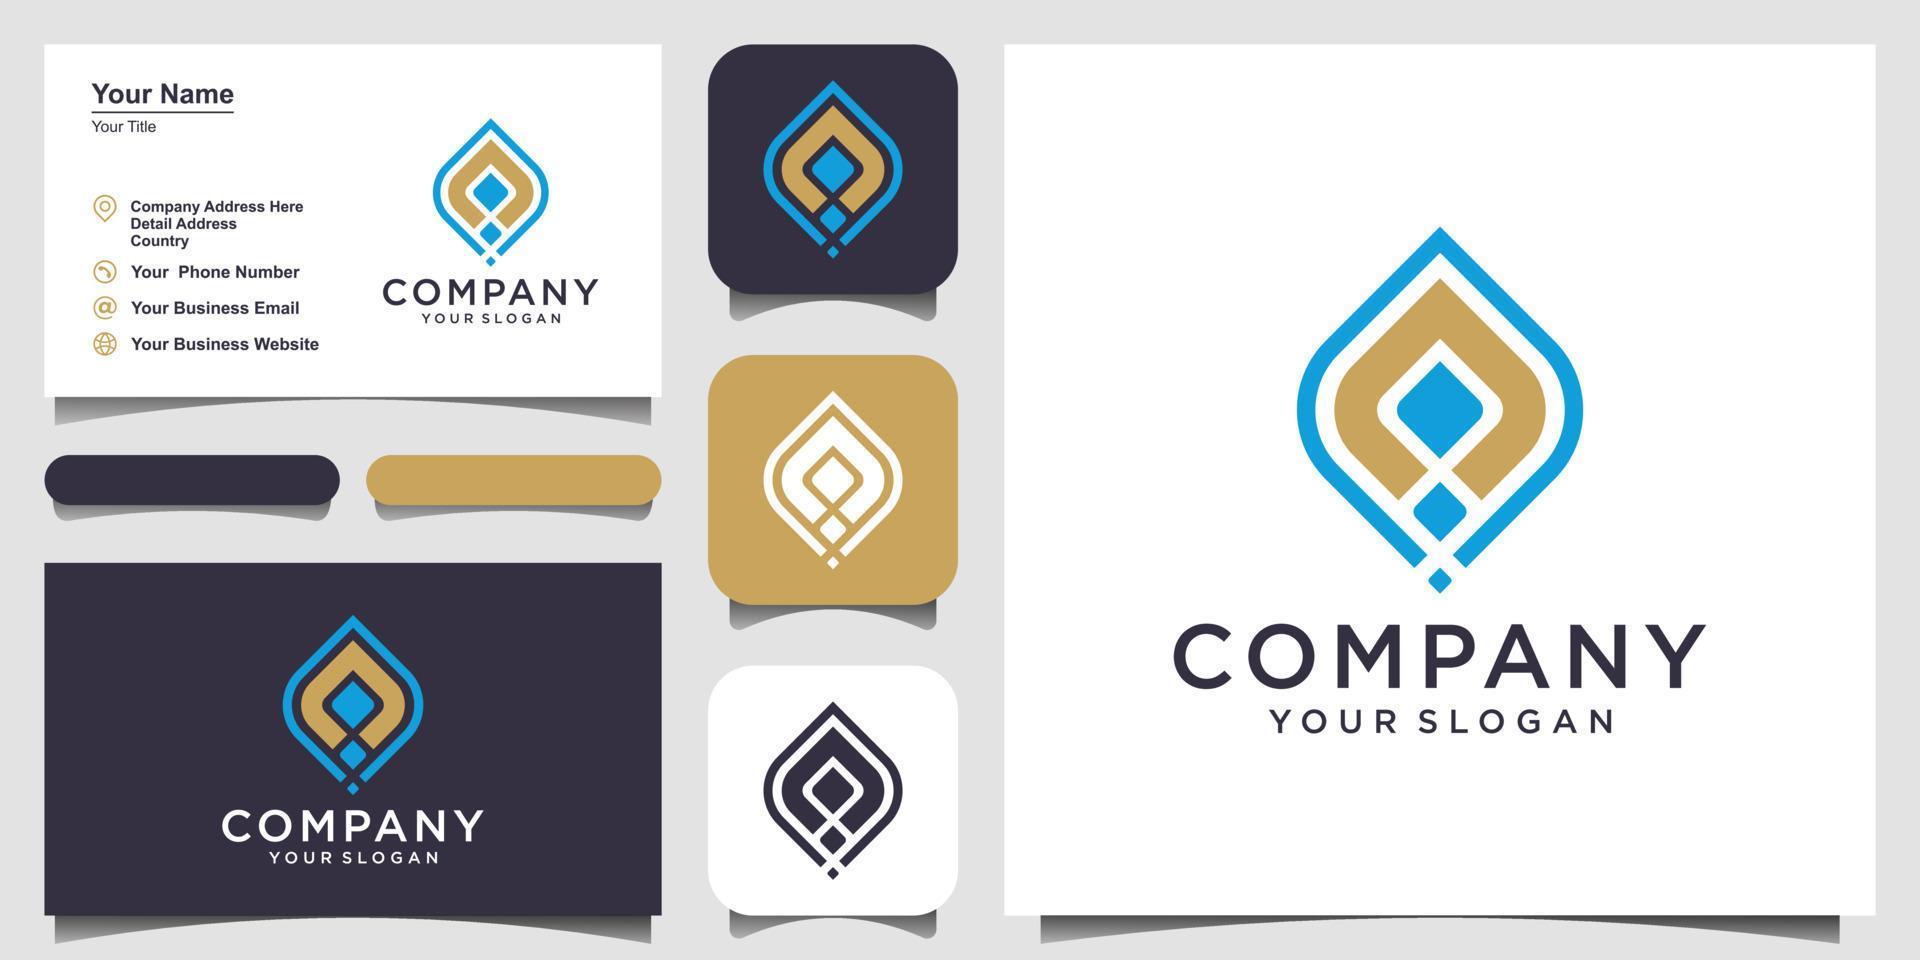 data tech solution logo design inspiration icon and business card vector